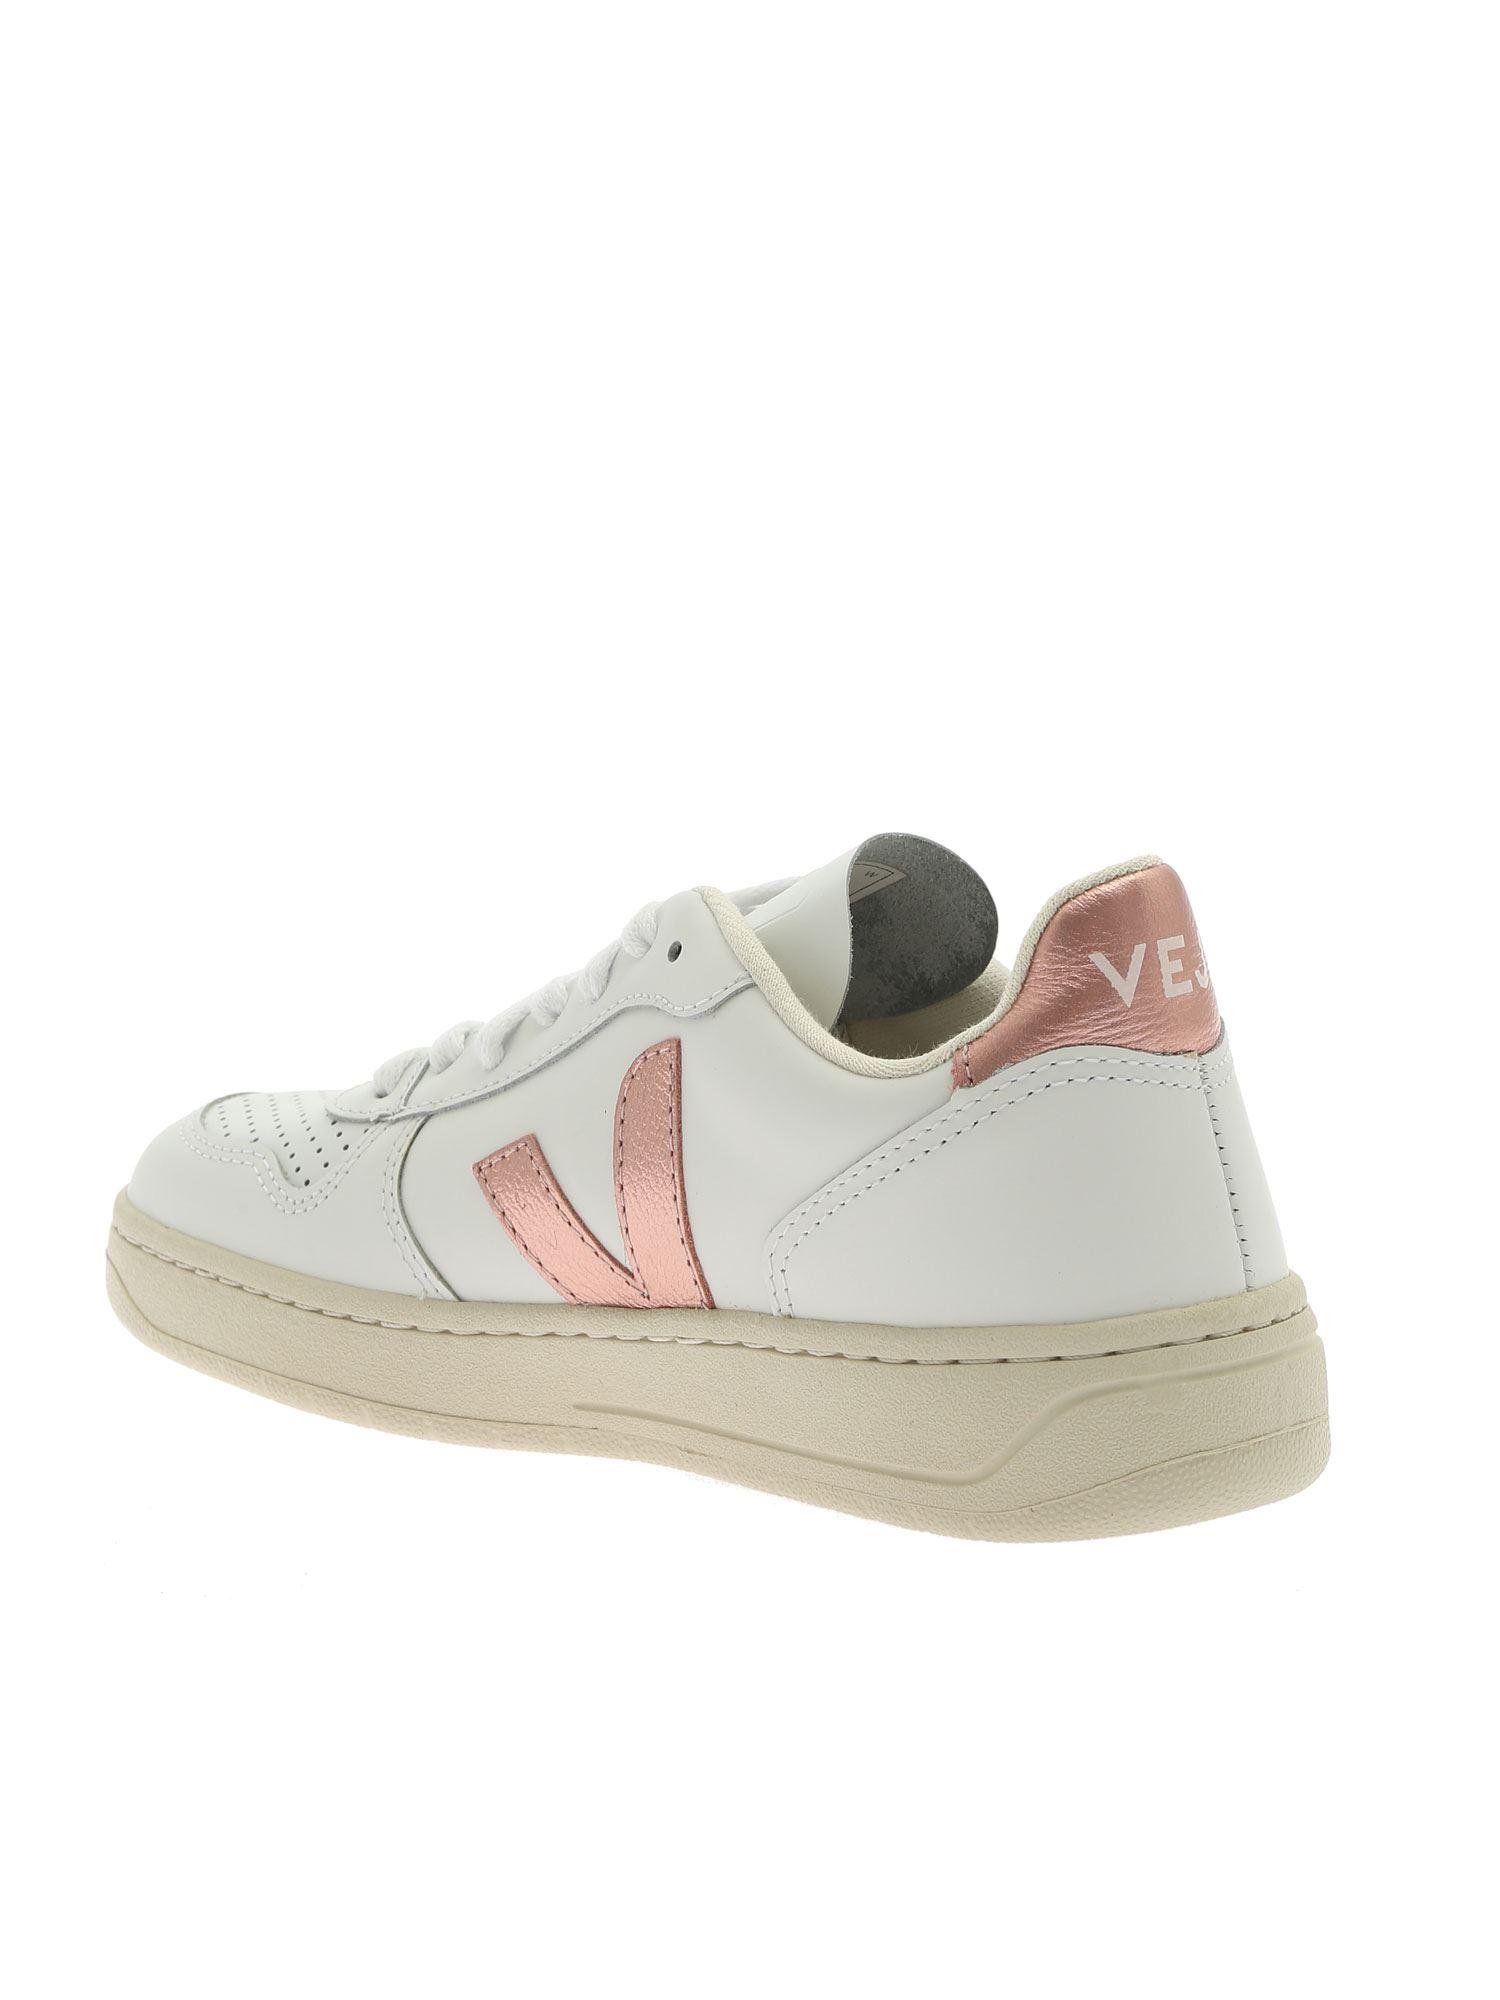 Veja Leather V-10 Sneakers In White And Pink - Lyst